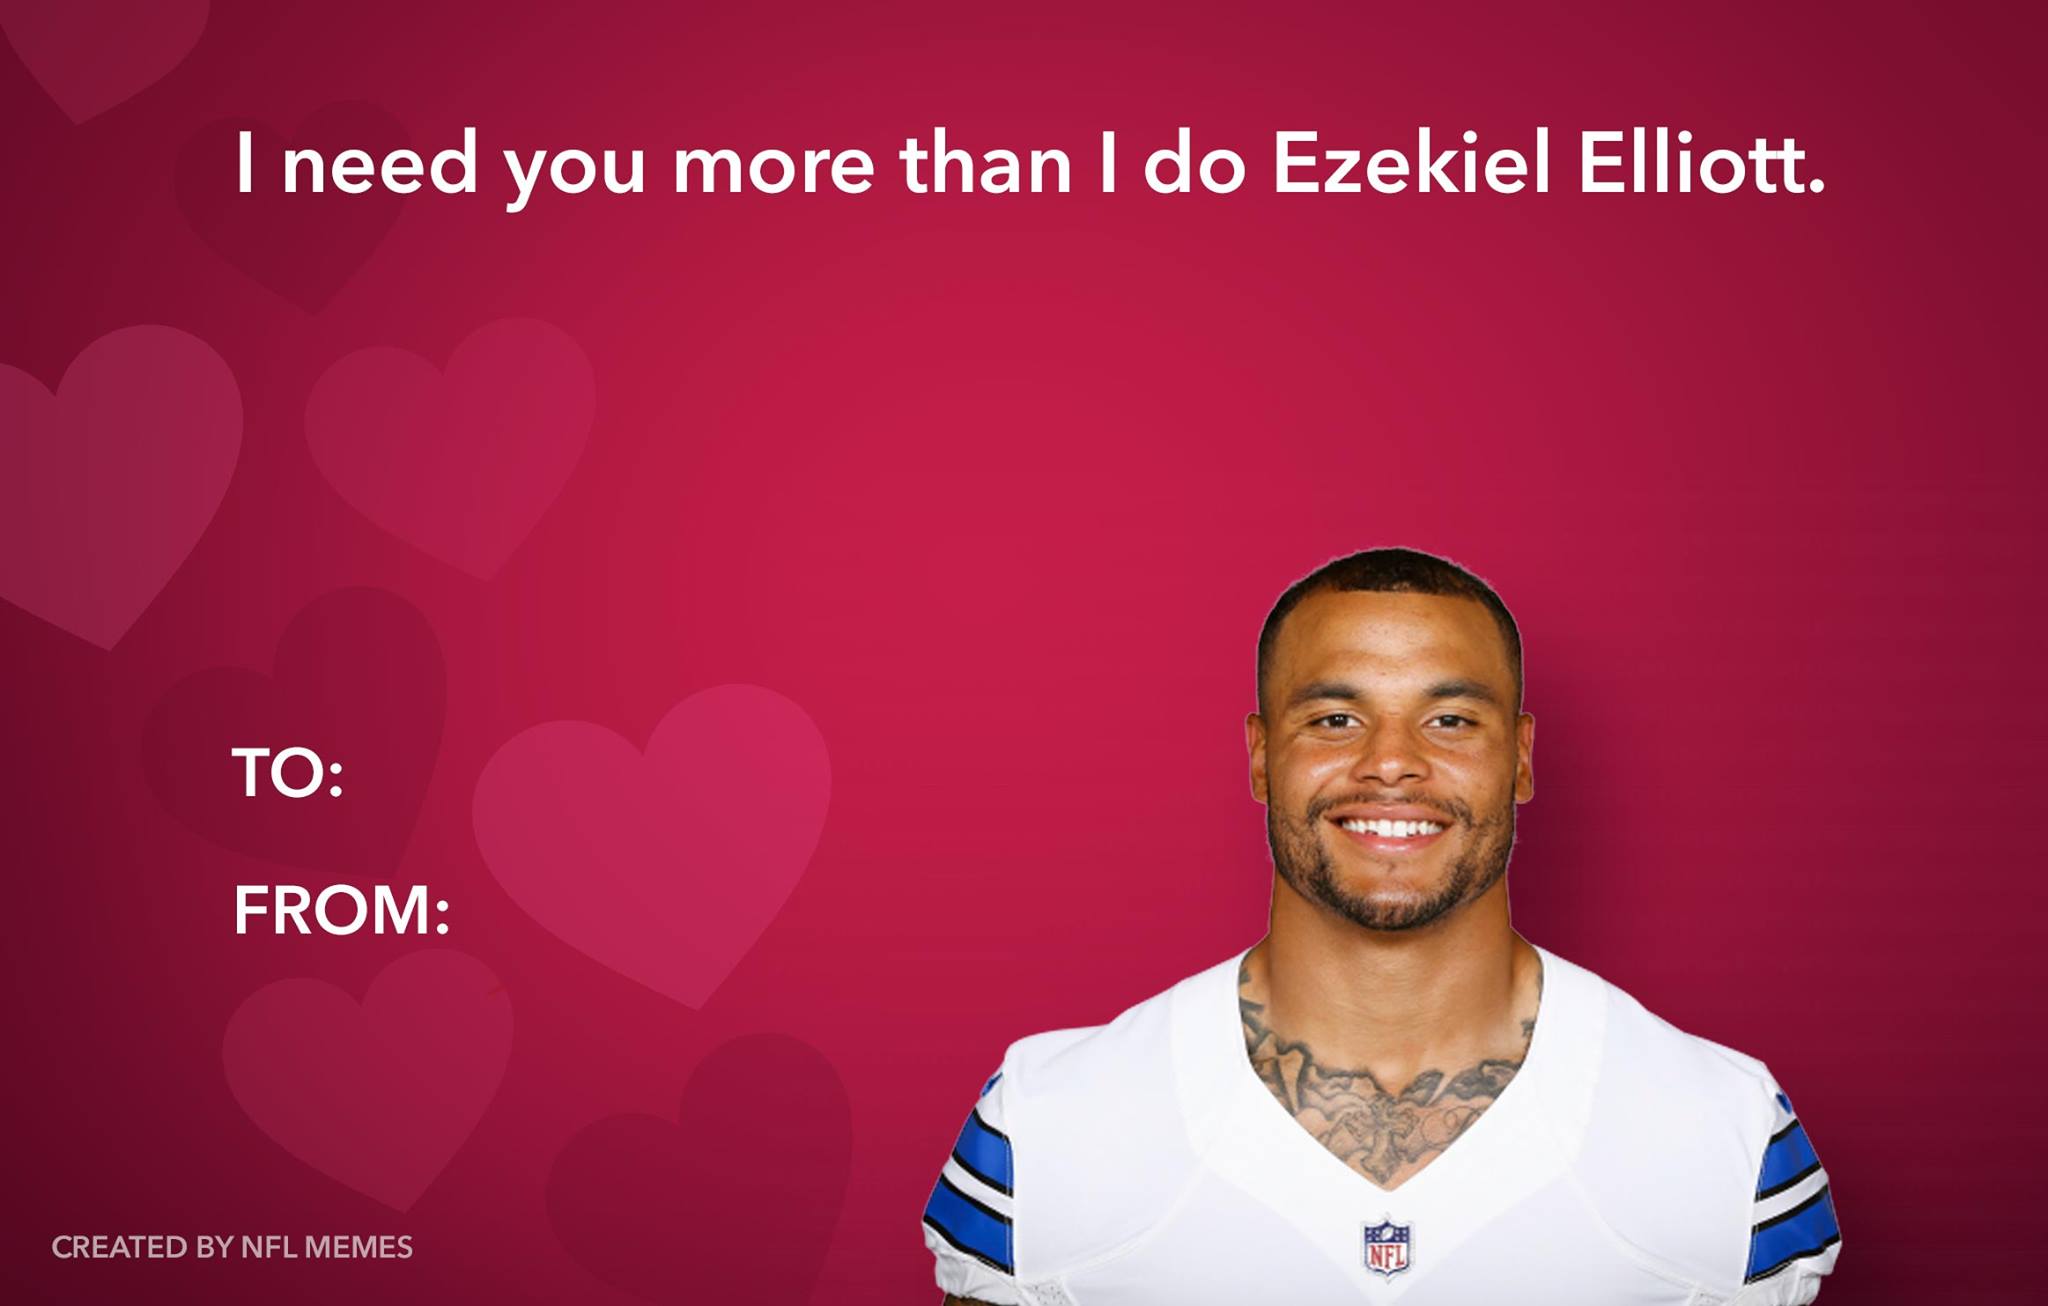 Funny Cowboys-themed Valentine's Day cards make the rounds